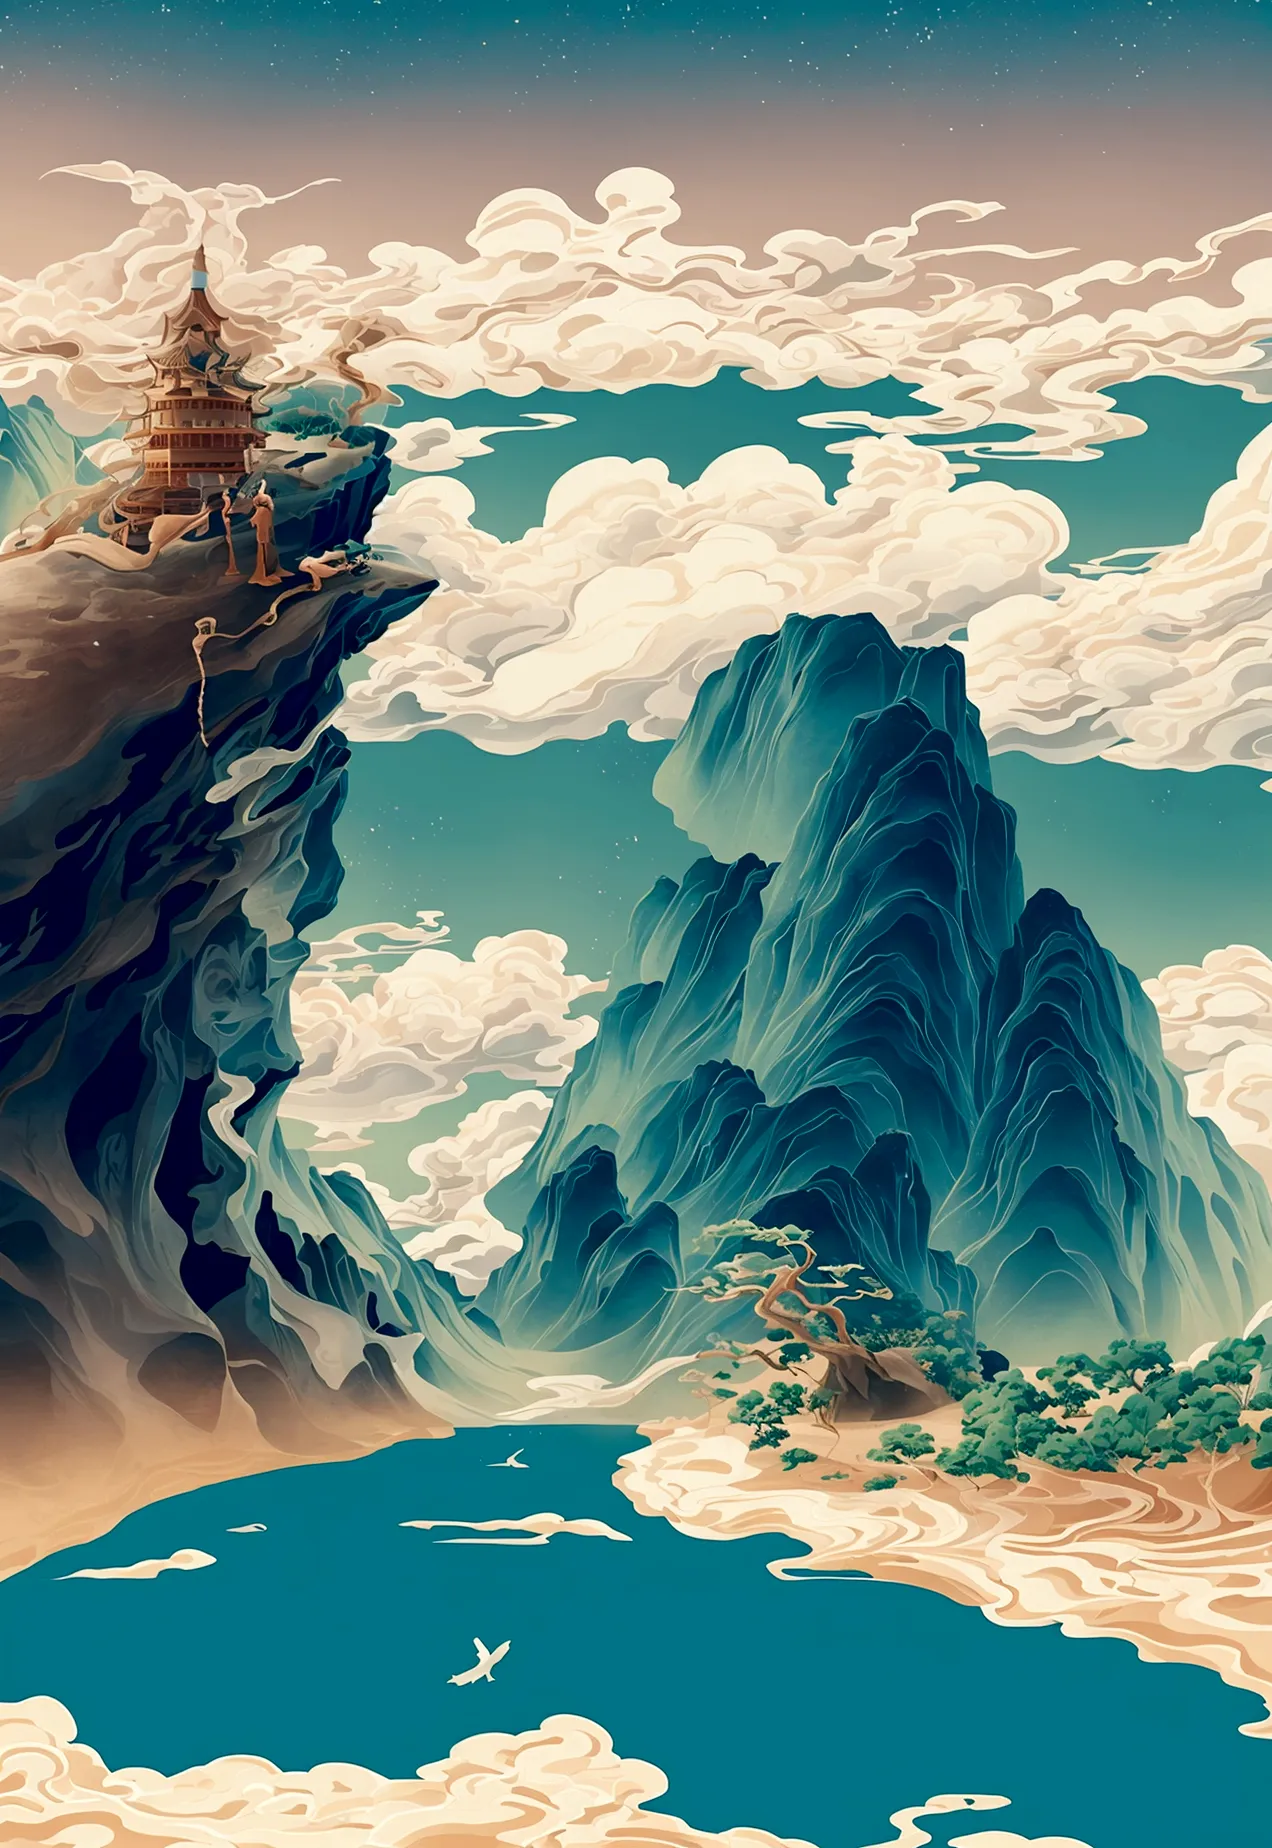 Generate a scene with a cliff and a sea of clouds below